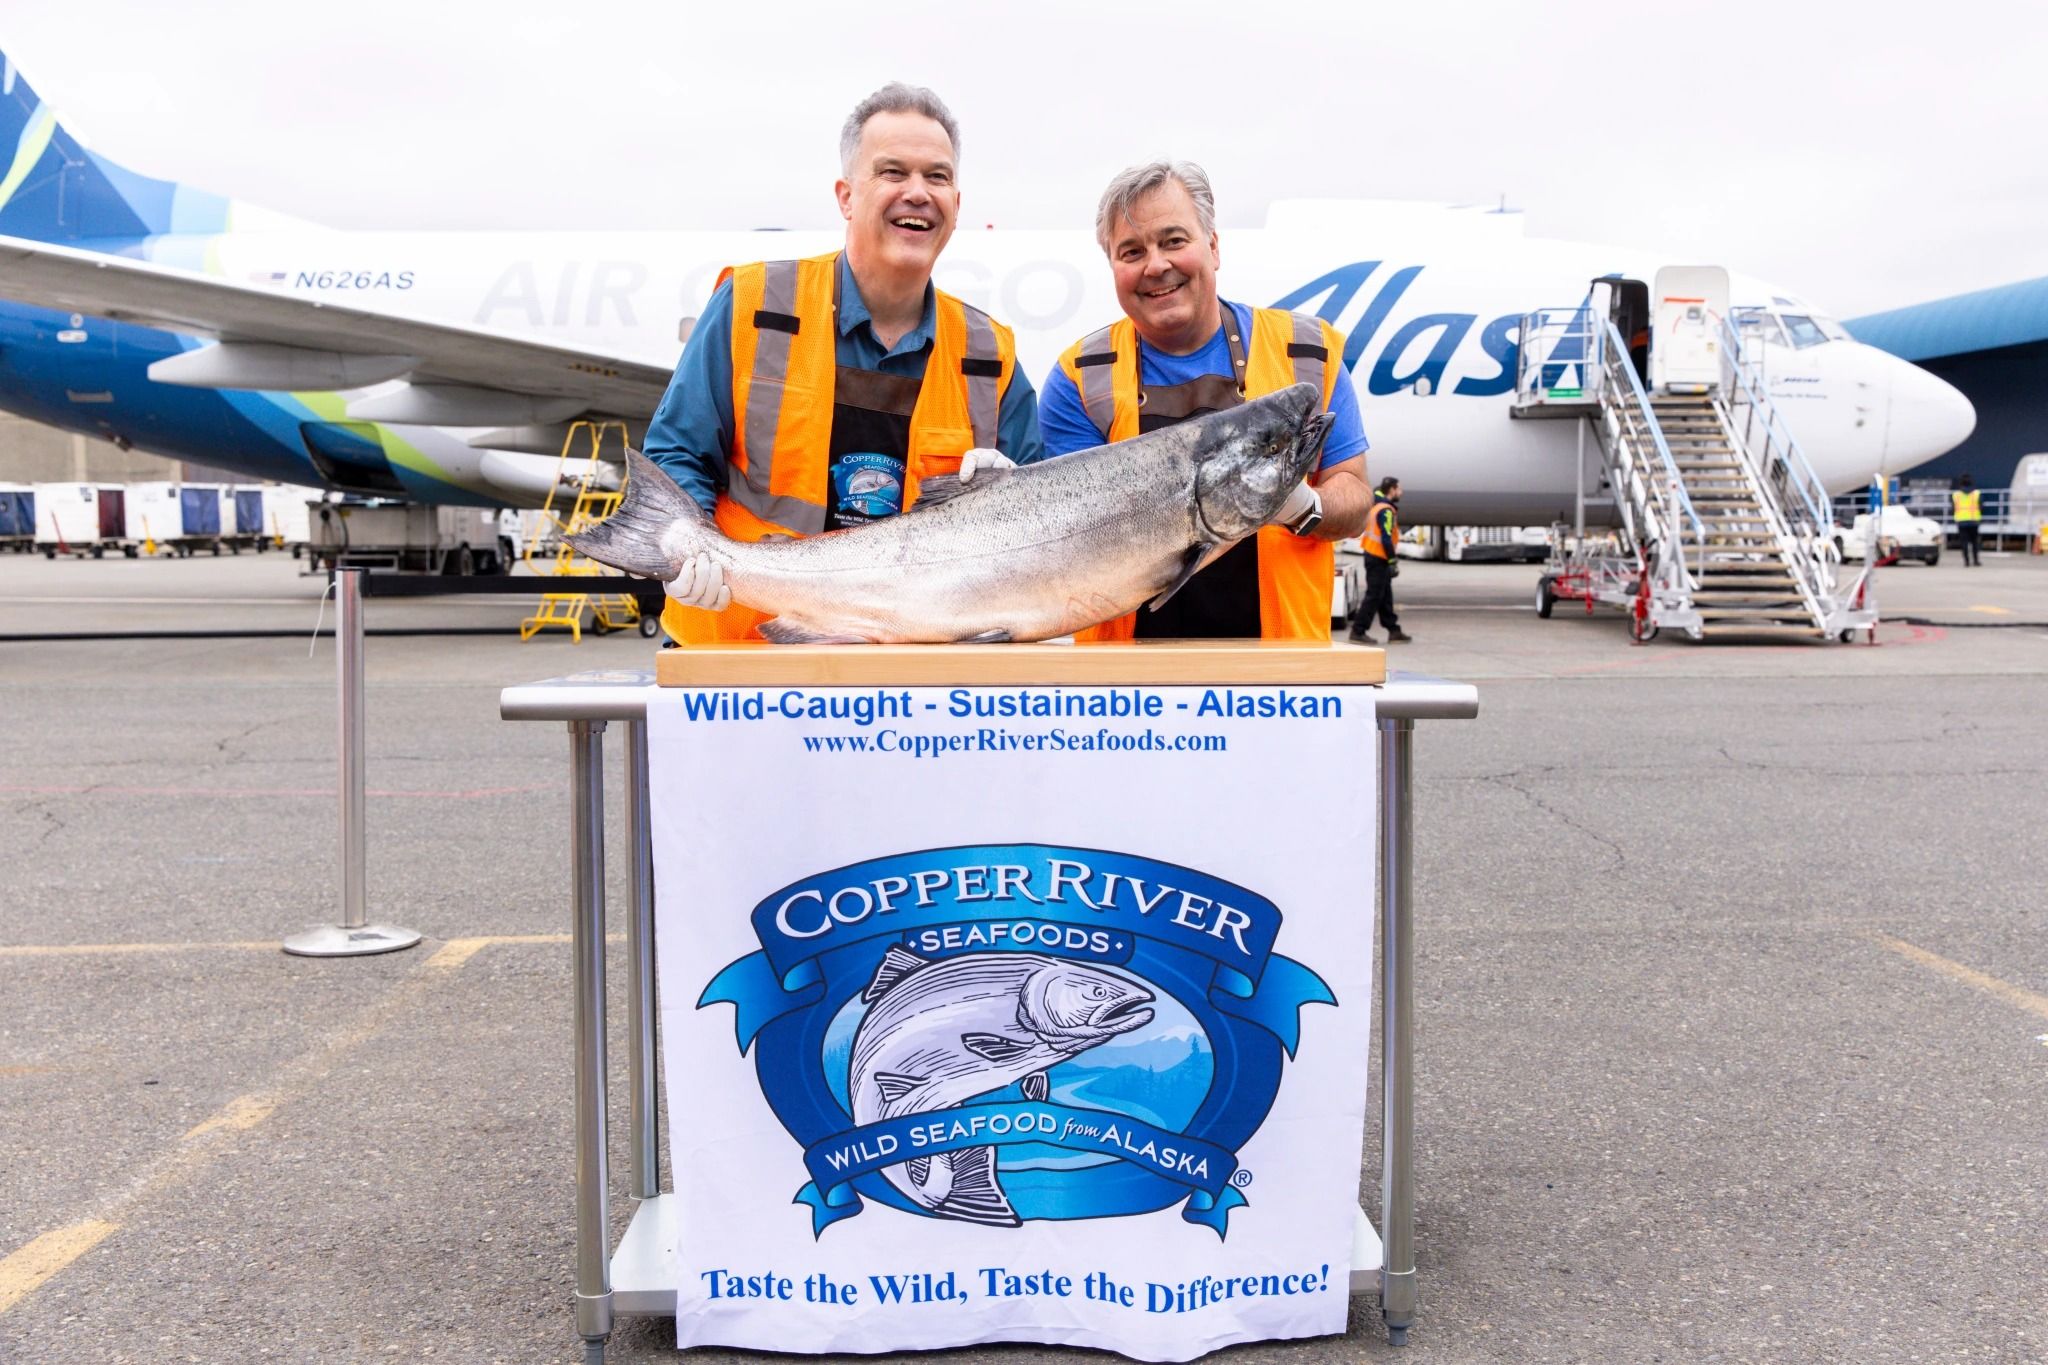 download (1) - Greg McDole and Jim Kostko, Copper River Seafoods. in front of a 737 Freighter